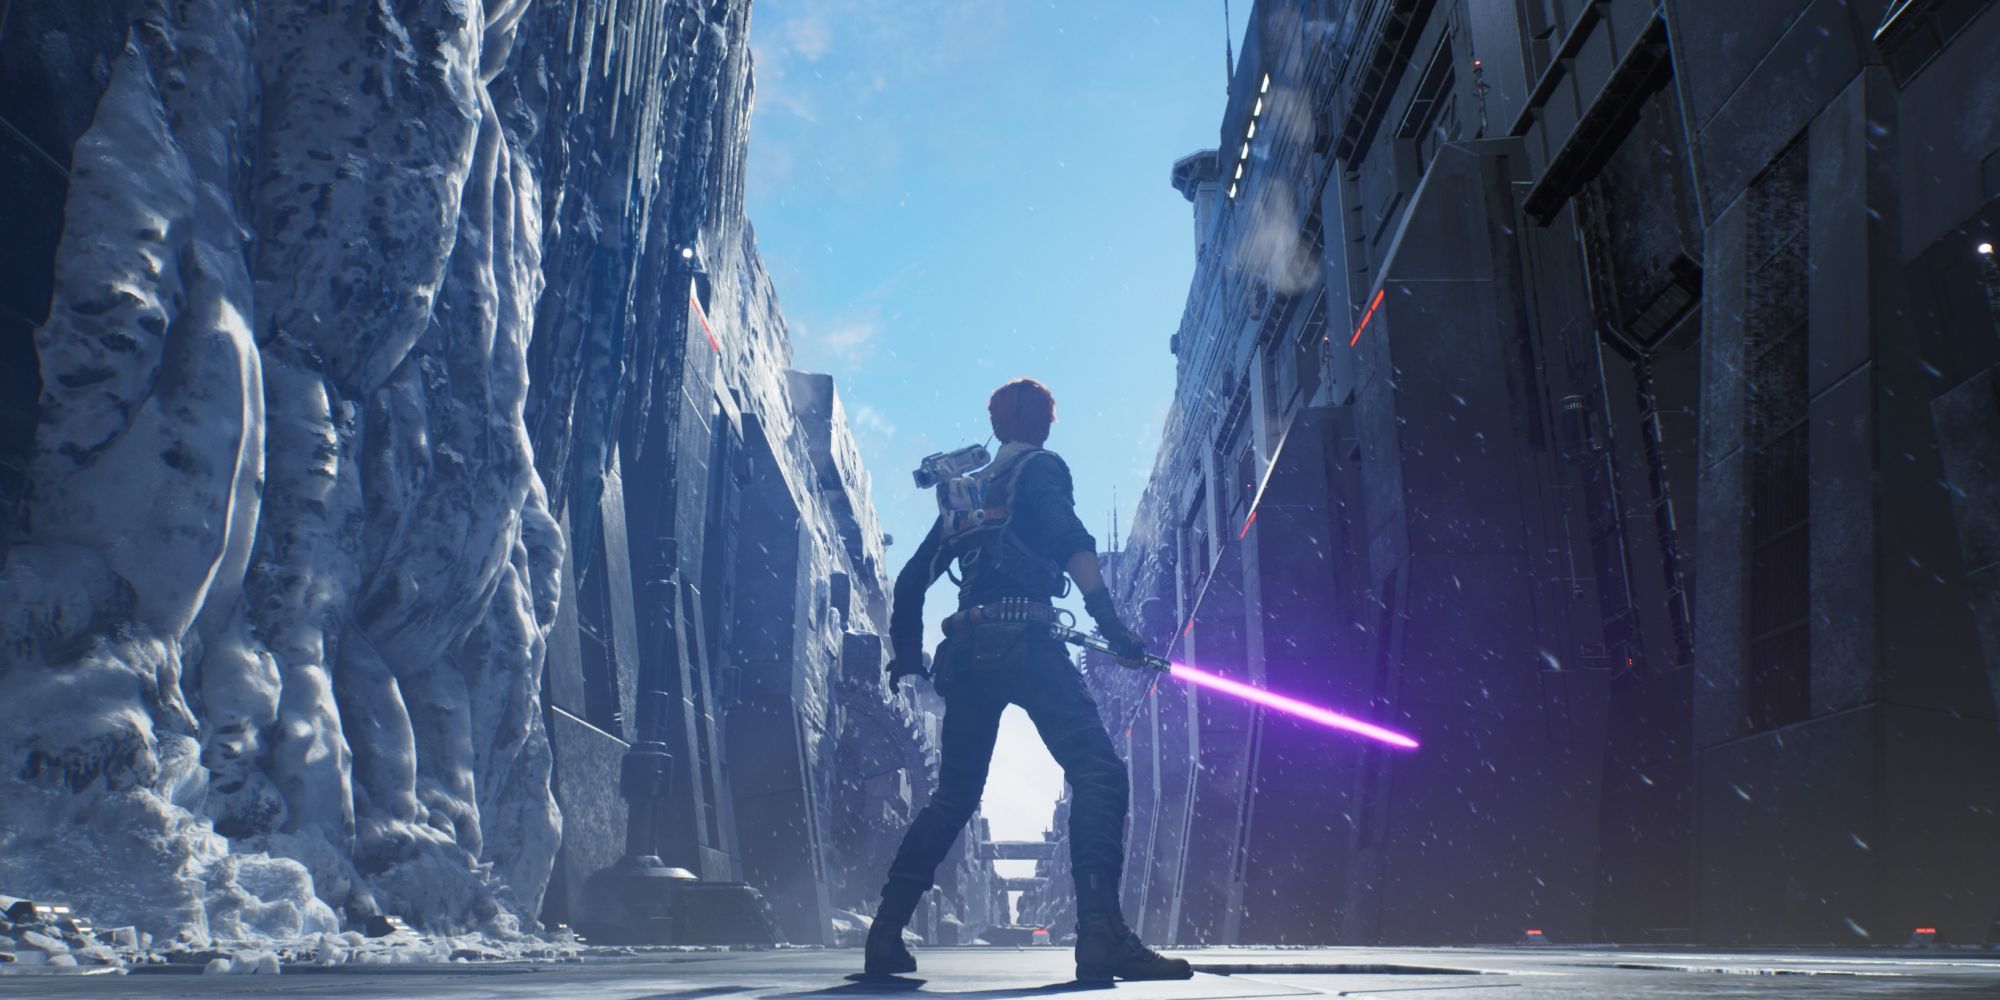 Cal standing in a snowy landscape with his lightsaber out in Star Wars Jedi - Fallen Order.